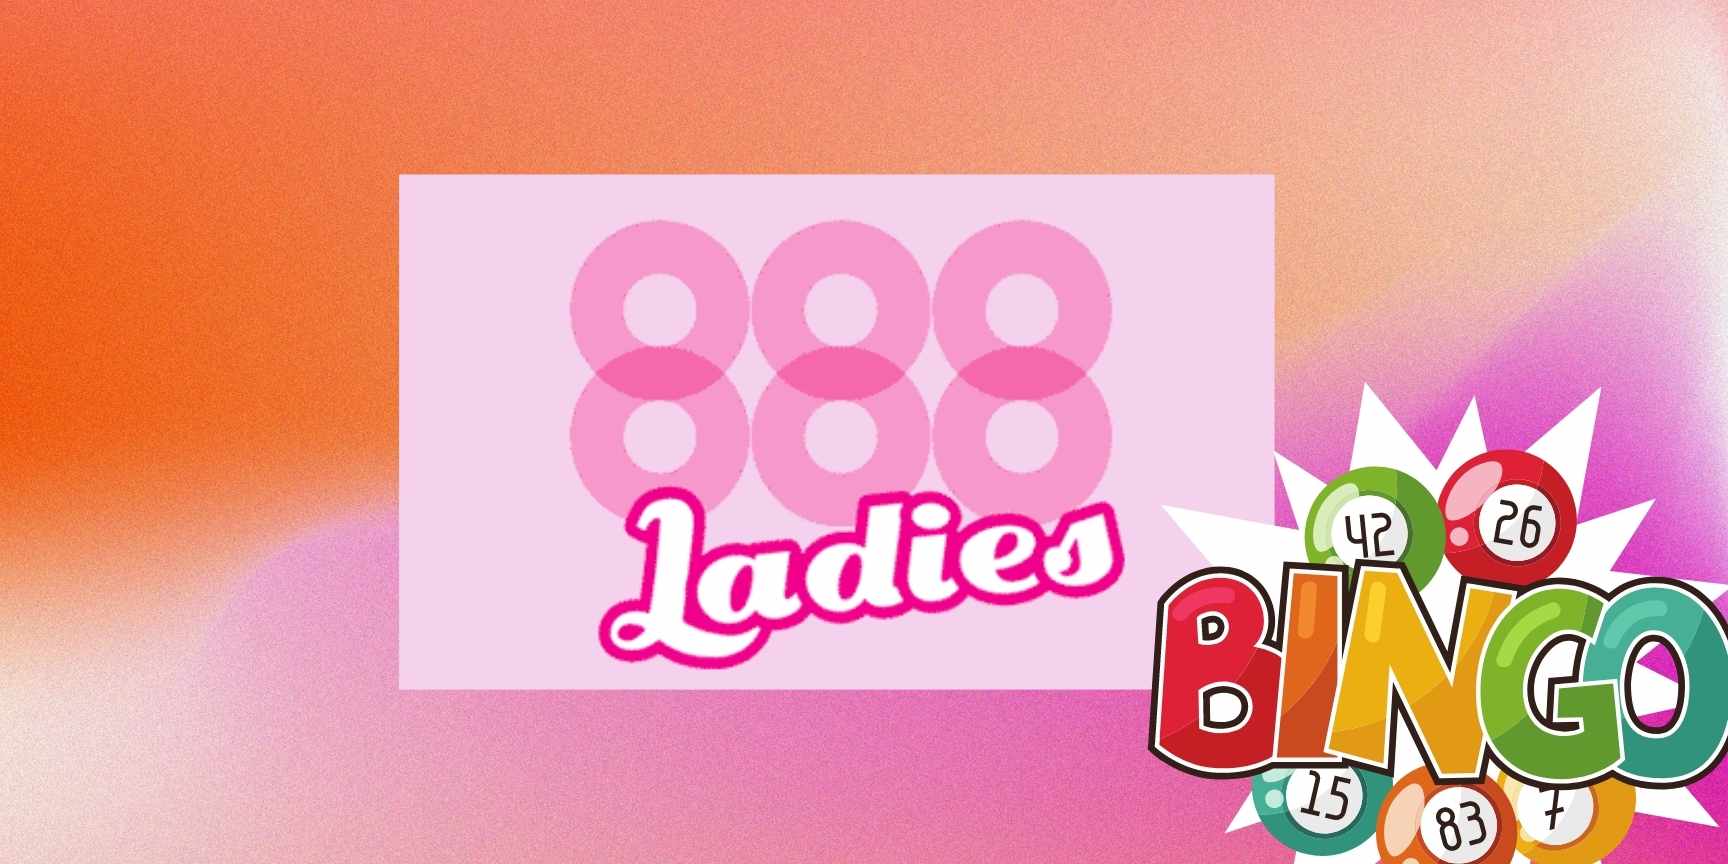 What attracts people to 888 Ladies gambling platform? post thumbnail image